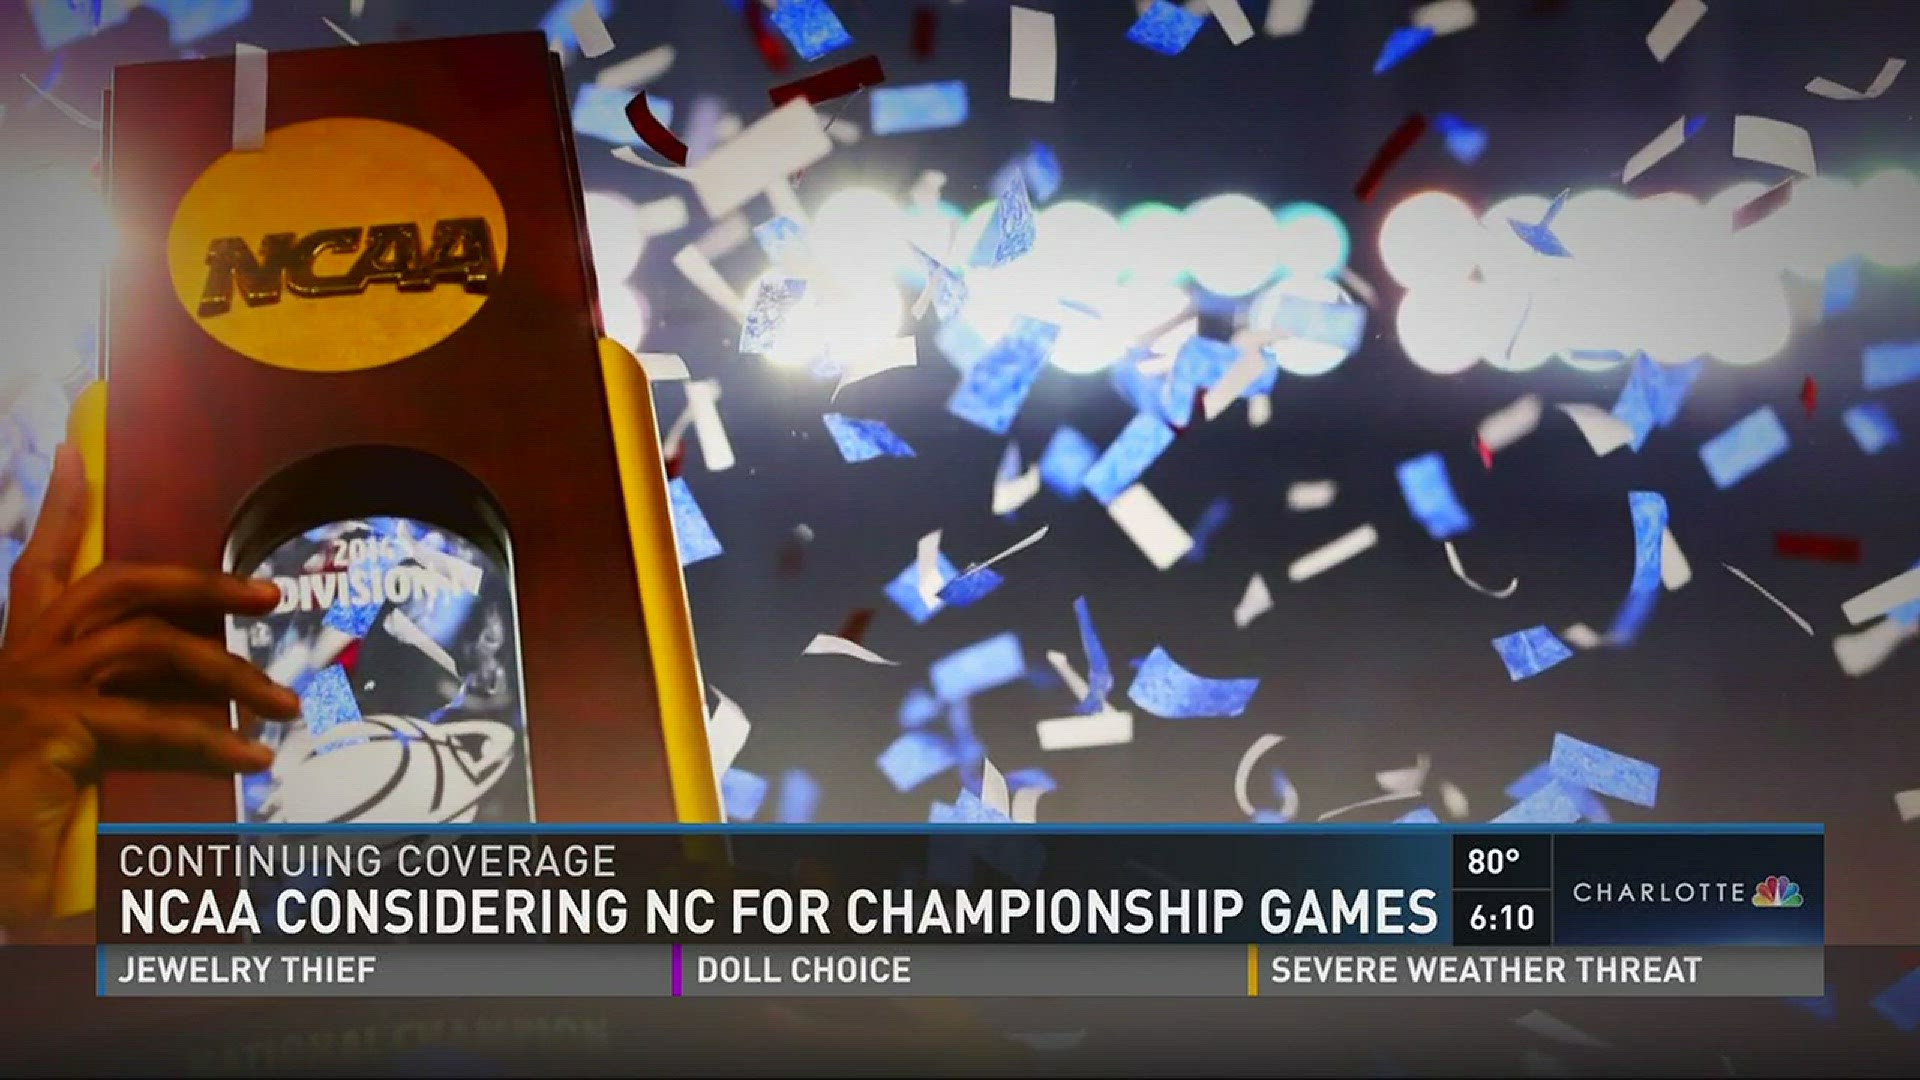 We learn Tuesday that North Carolina is back in the running to host future NCAA championship games.